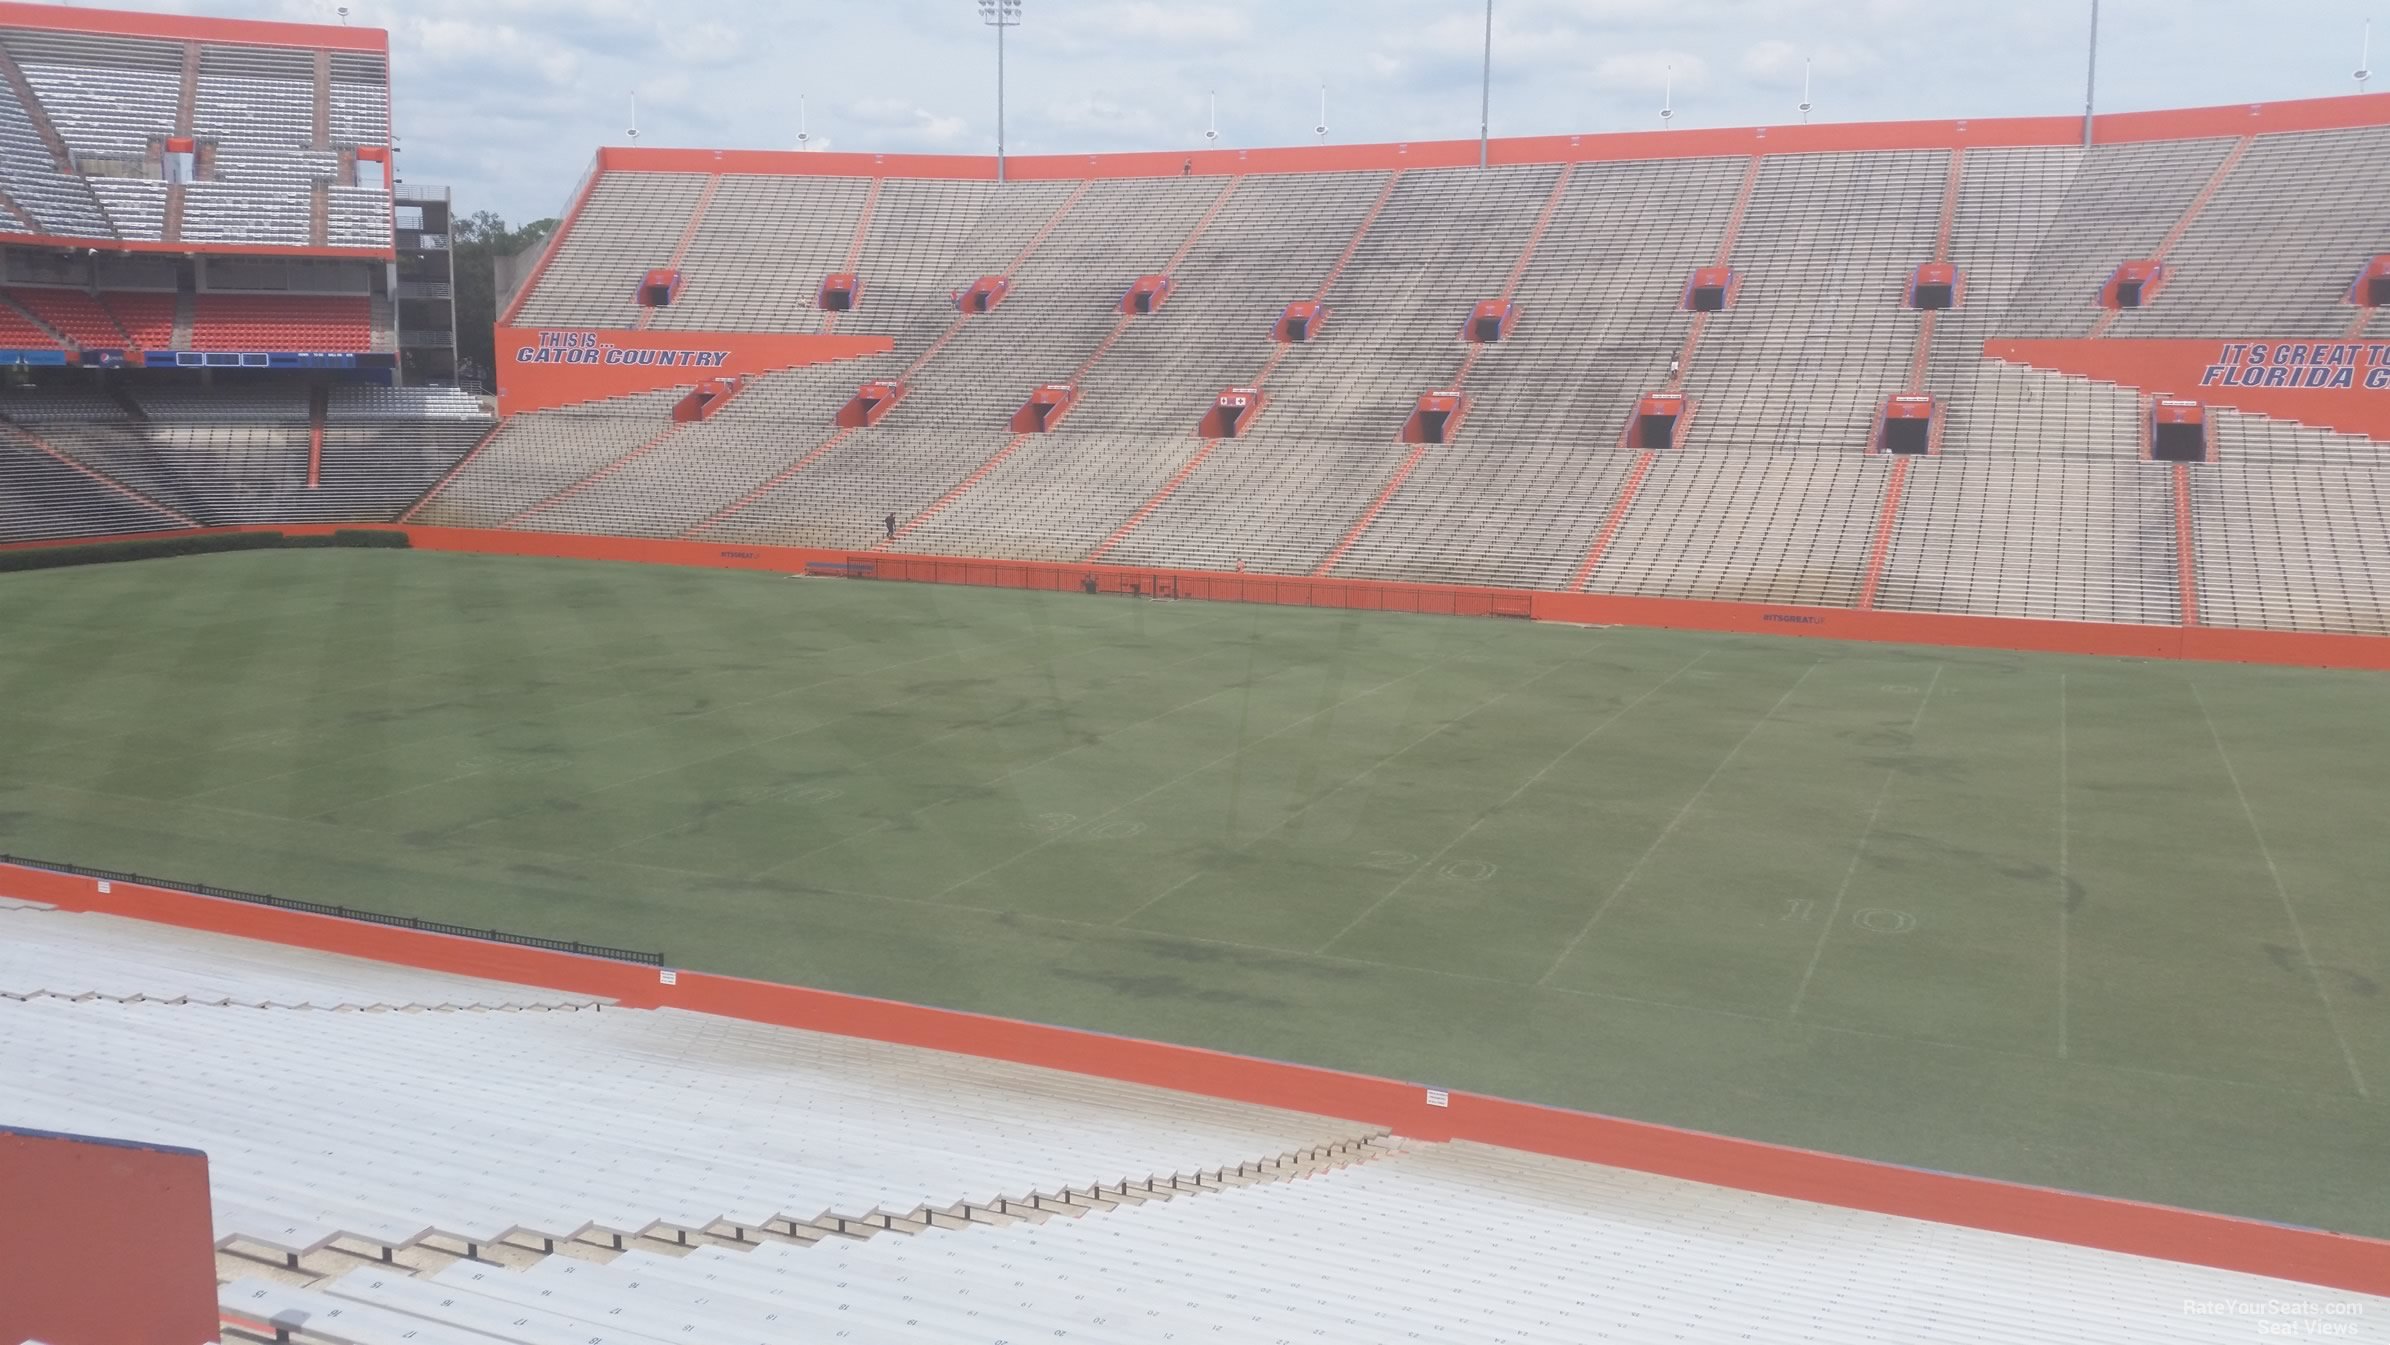 section 4, row 41 seat view  - ben hill griffin stadium